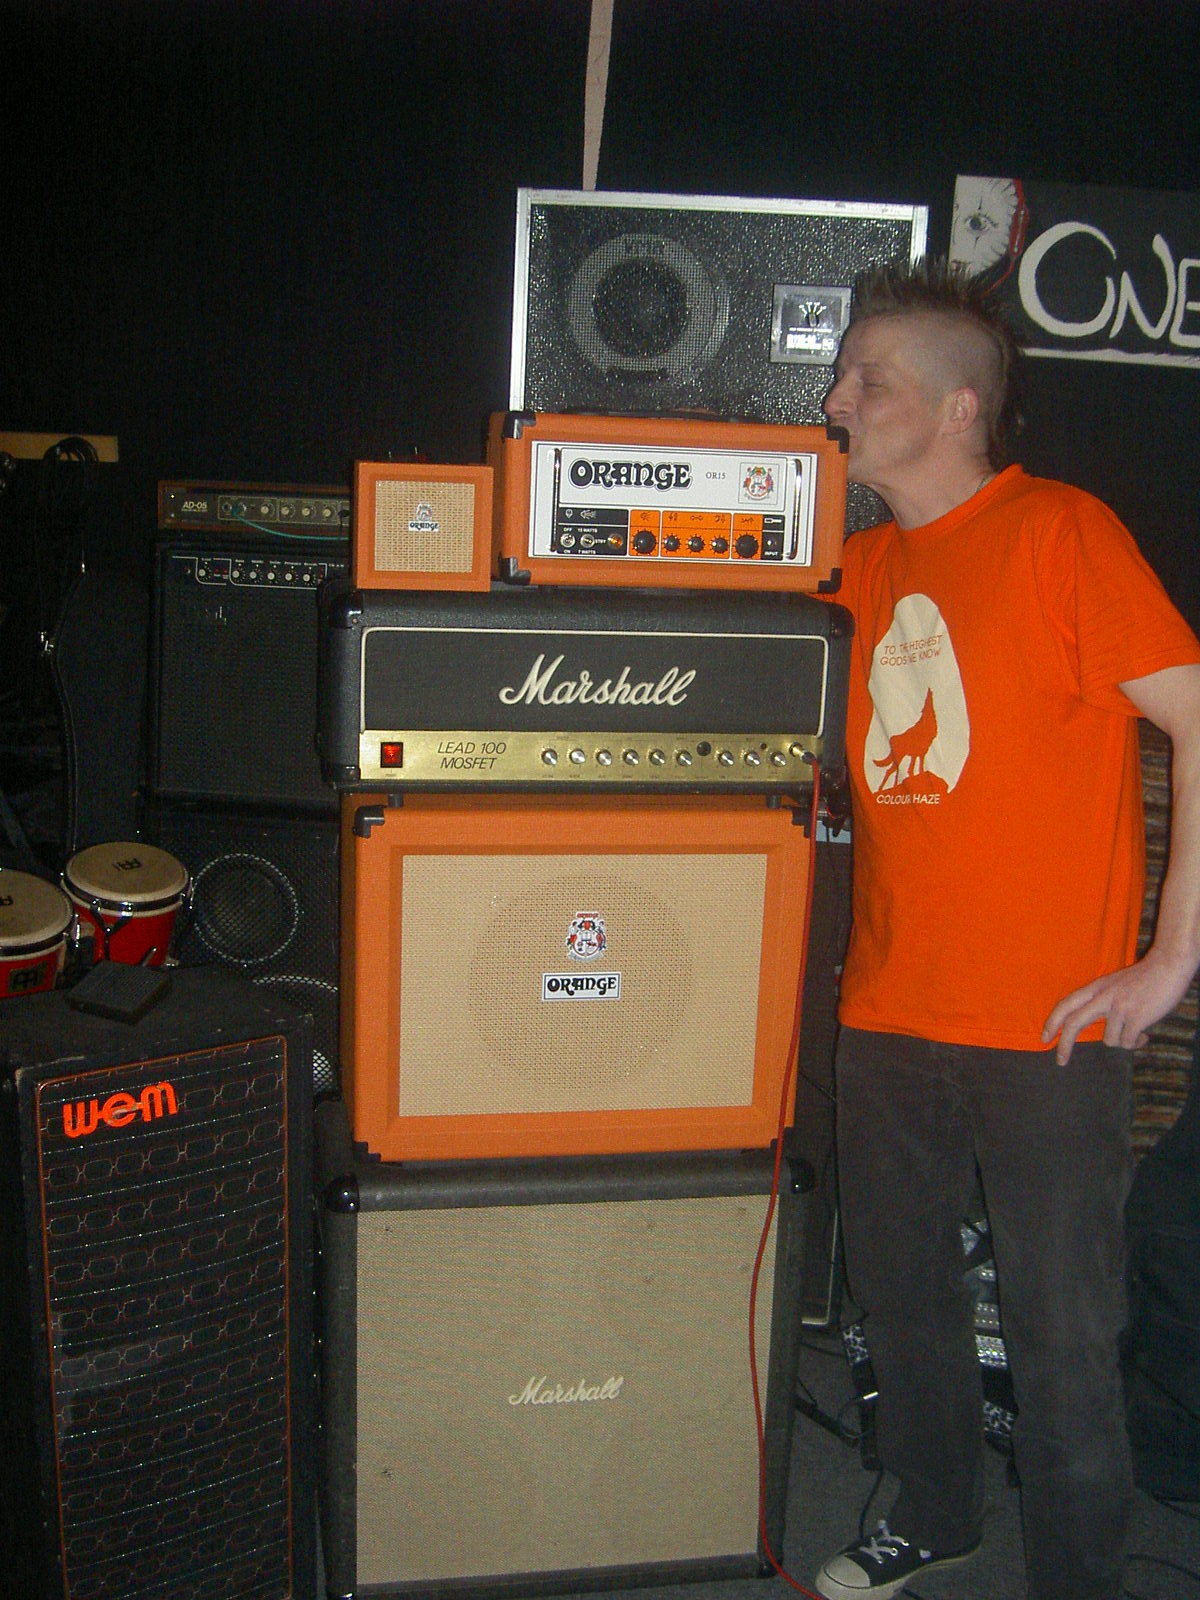 Picture Gallery! (No comments allowed!) - Page 34 - Orange Amps Forum